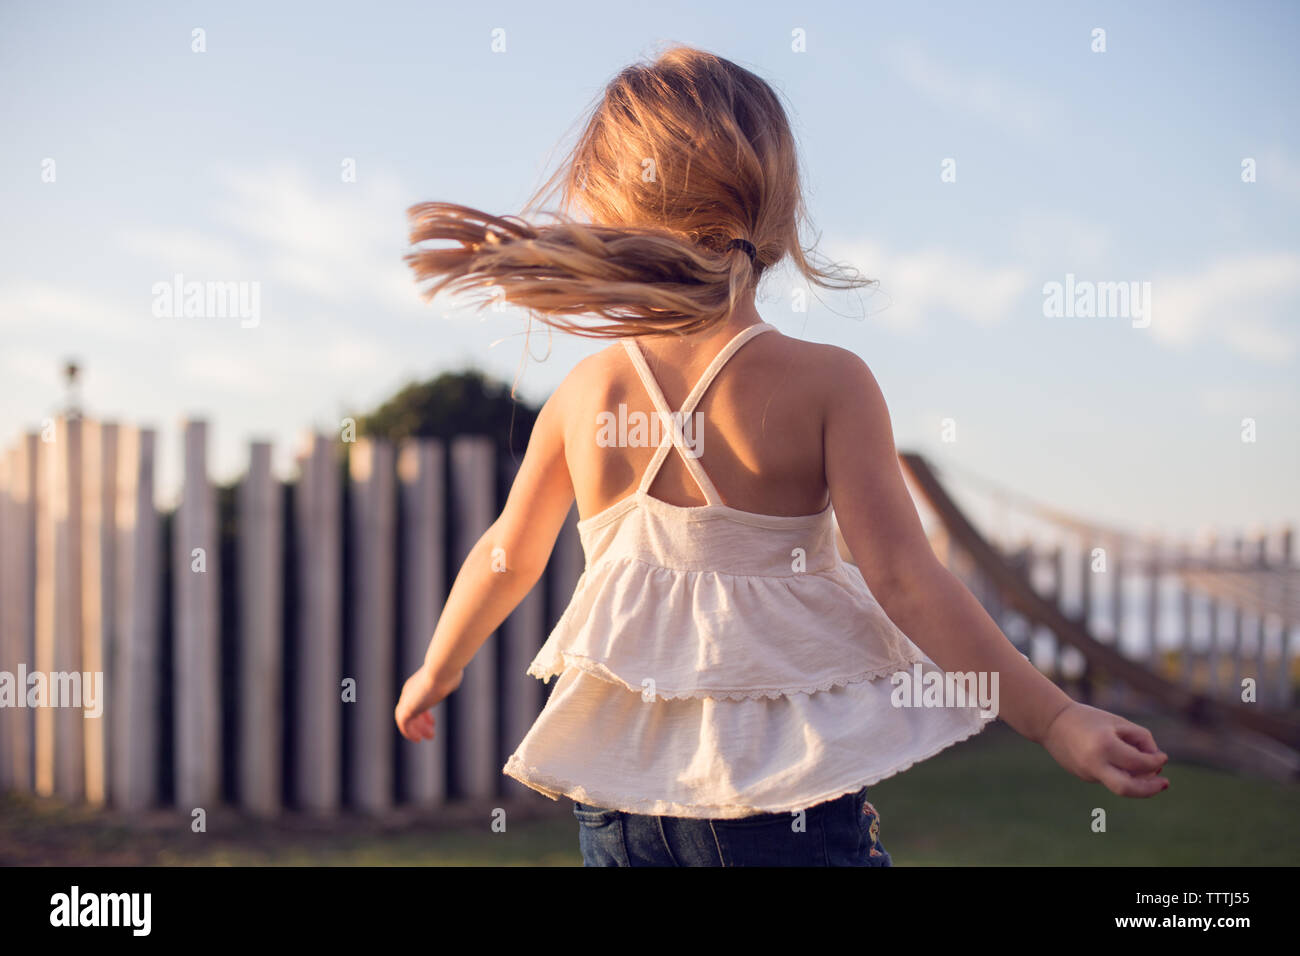 Little girl imagining she's a dancer, spinning and twirling in the sun Stock Photo